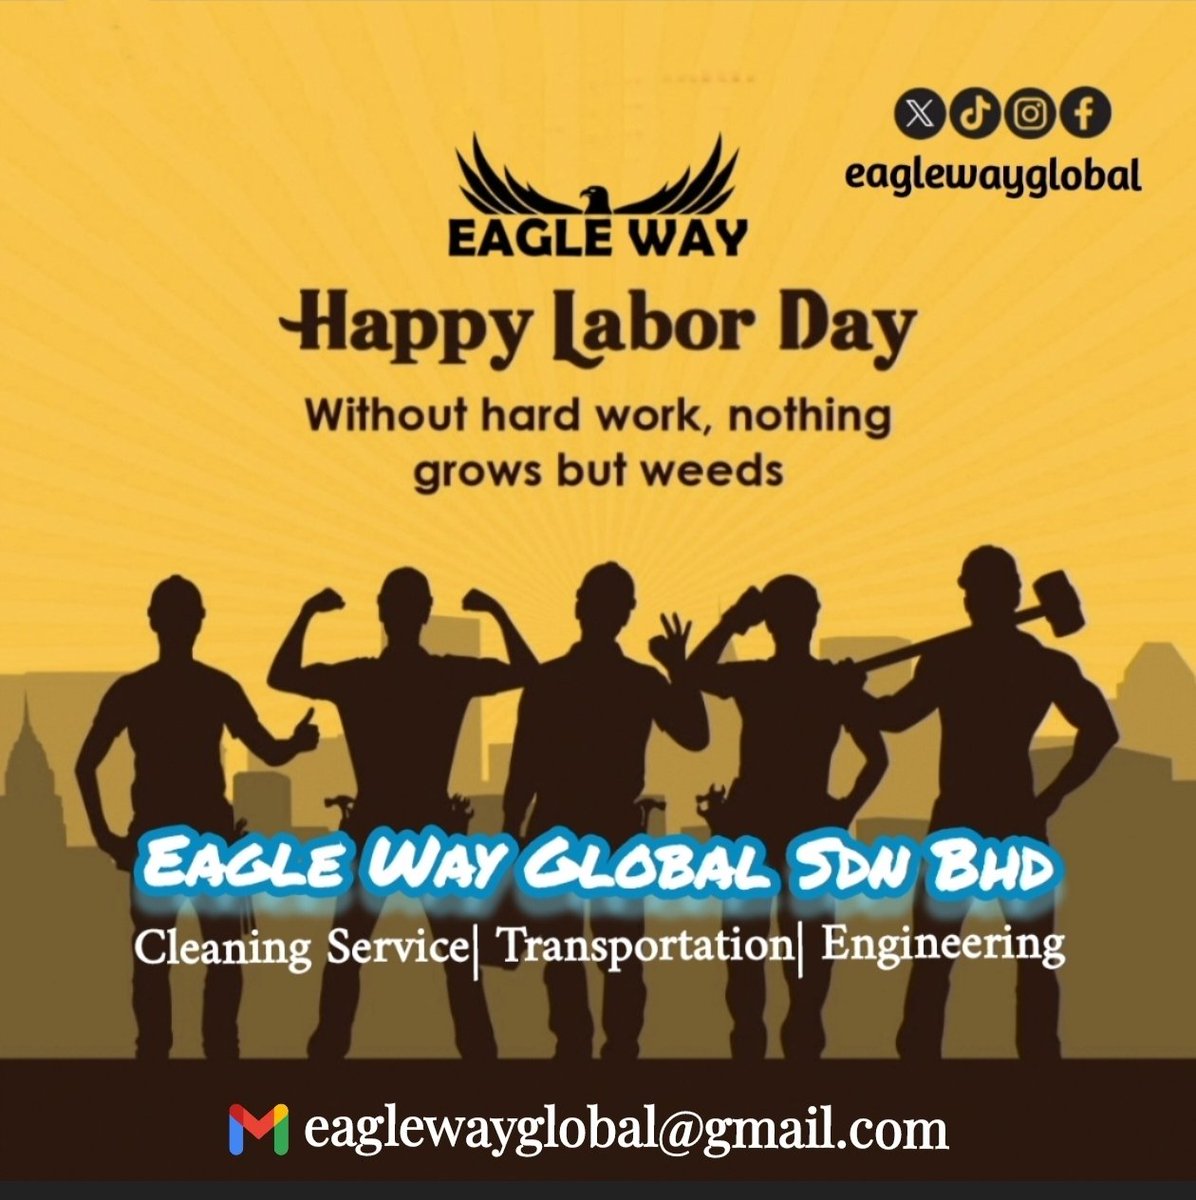 May all workers be empowered to pursue their passions and dreams, and to achieve their full potential. Happy Labour Day.
#eaglewayglobal 
#eagleway 
#haripekerja 
#laborday 
#labourday 
#happylabourday